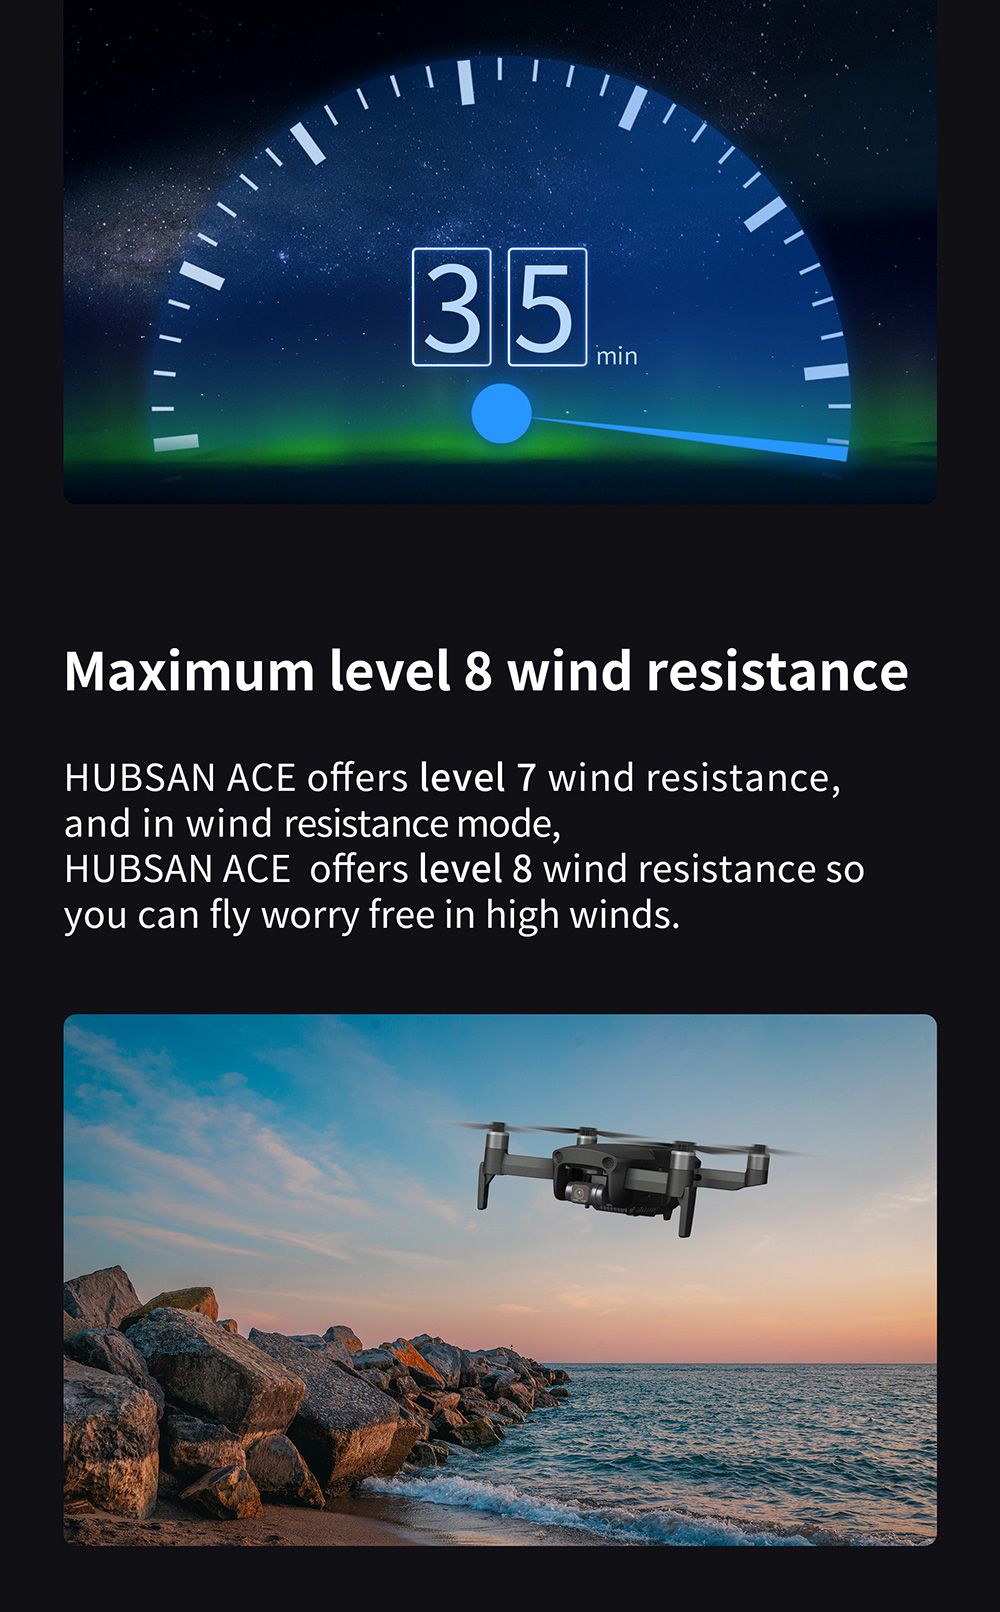 Hubsan ACE GPS 10KM FPV with 1/1.3' CMOS 4K Camera 3-axis Gimbal 35mins Flight Time - With Storage Bag Three Battery